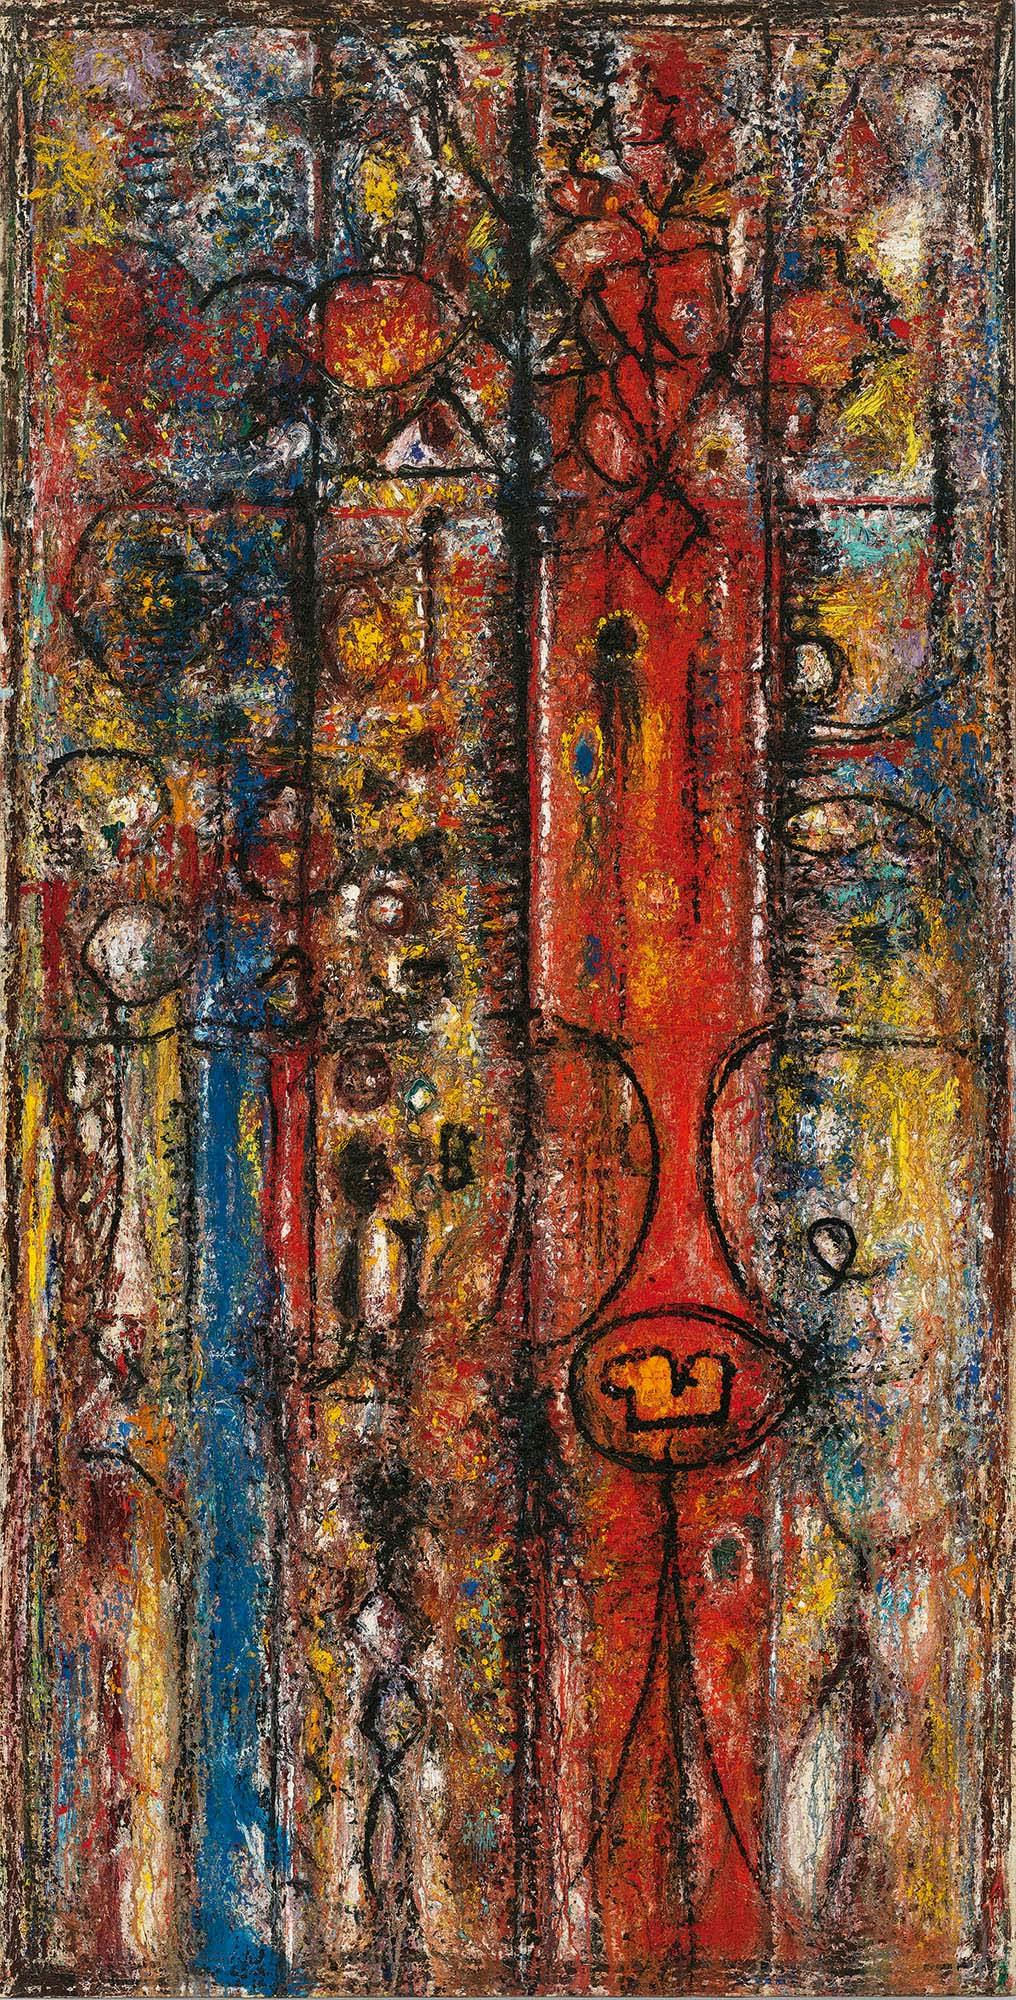 The Magnificent
1950–51
Oil on canvas
86 3/8 x 44 in. (219.2 x 111.8 cm)
Whitney Museum of American Art, New York (53.43)
 – The Richard Pousette-Dart Foundation